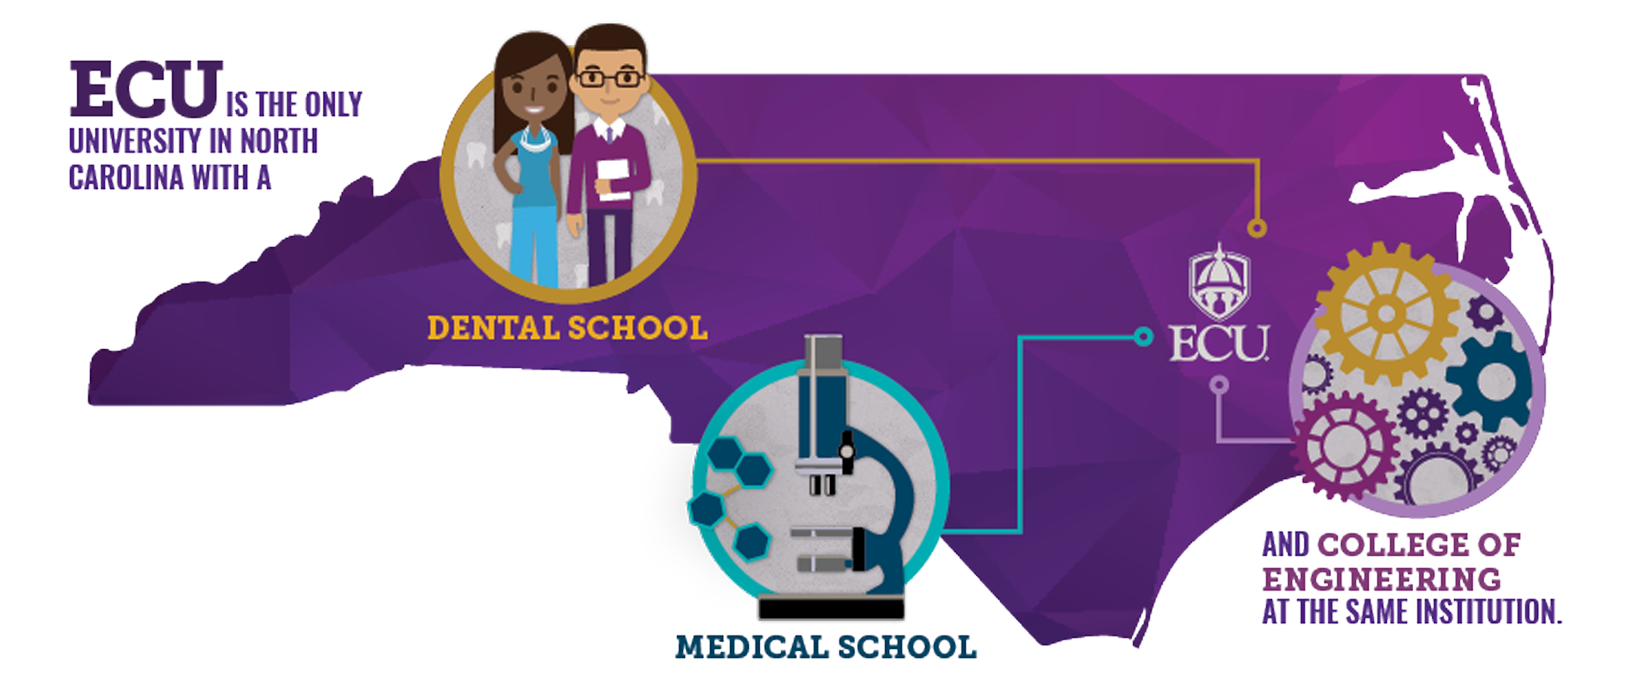 ECU is the only university in North Carolina with a dental school, medical school, and college of engineering at the same institution.